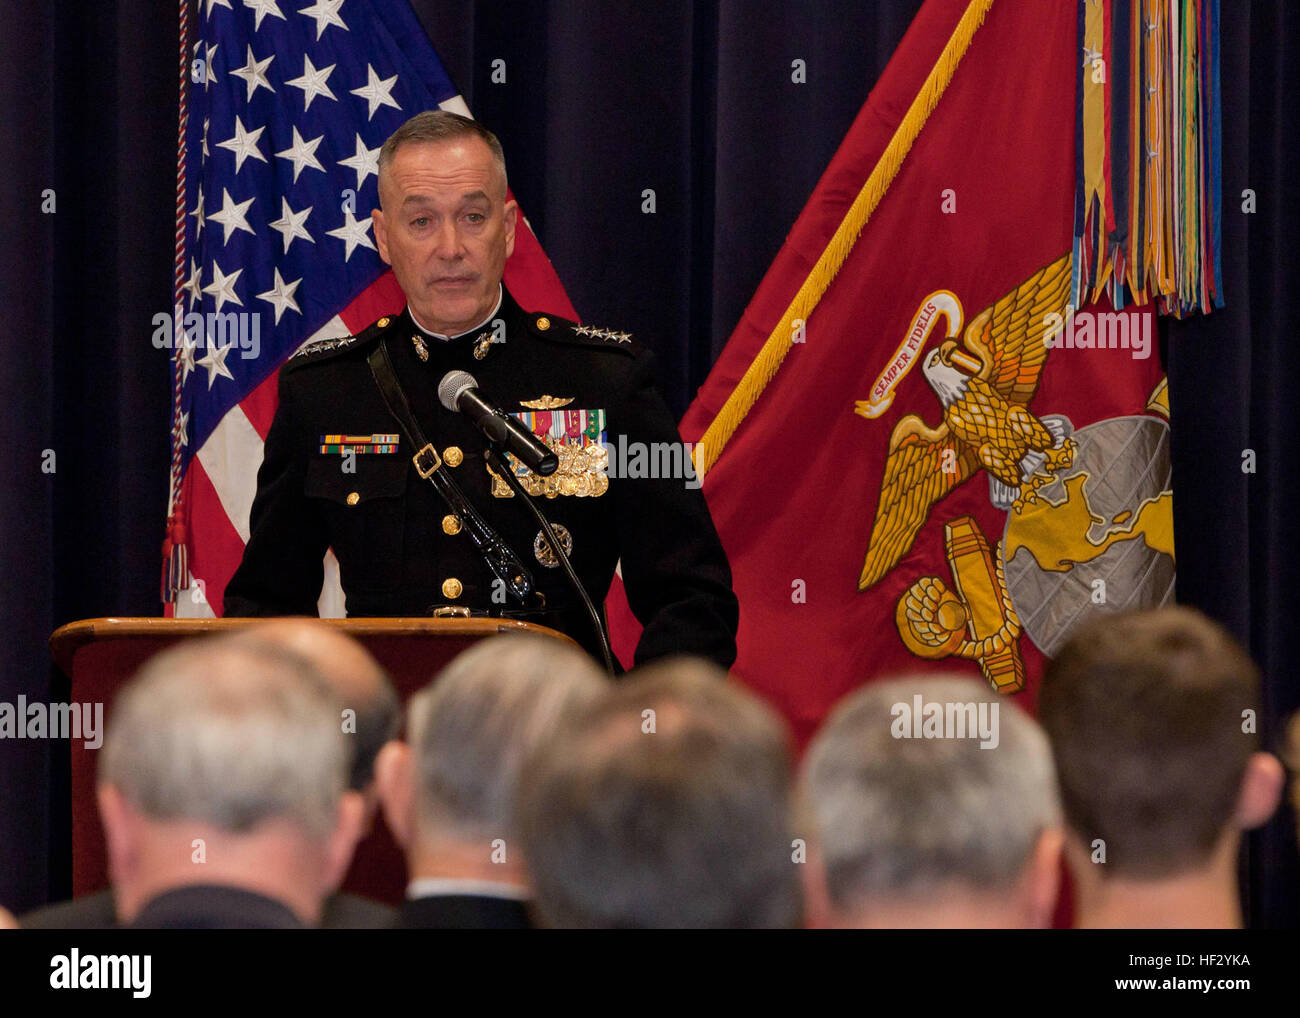 Commandant of the Marine Corps, Gen. Joseph F. Dunford, Jr., speaks during an Iwo Jima reunion at Marine Barracks Washington, D.C., Feb. 19, 2015. The event commemorated the 70th Anniversary of the Battle of Iwo Jima with veterans, families, dignitaries and service members. (U.S. Marine Corps photo by Cpl. Lauren L. Whitney/Released) 70th Iwo Jima Reunion 150219-M-GZ082-083 Stock Photo